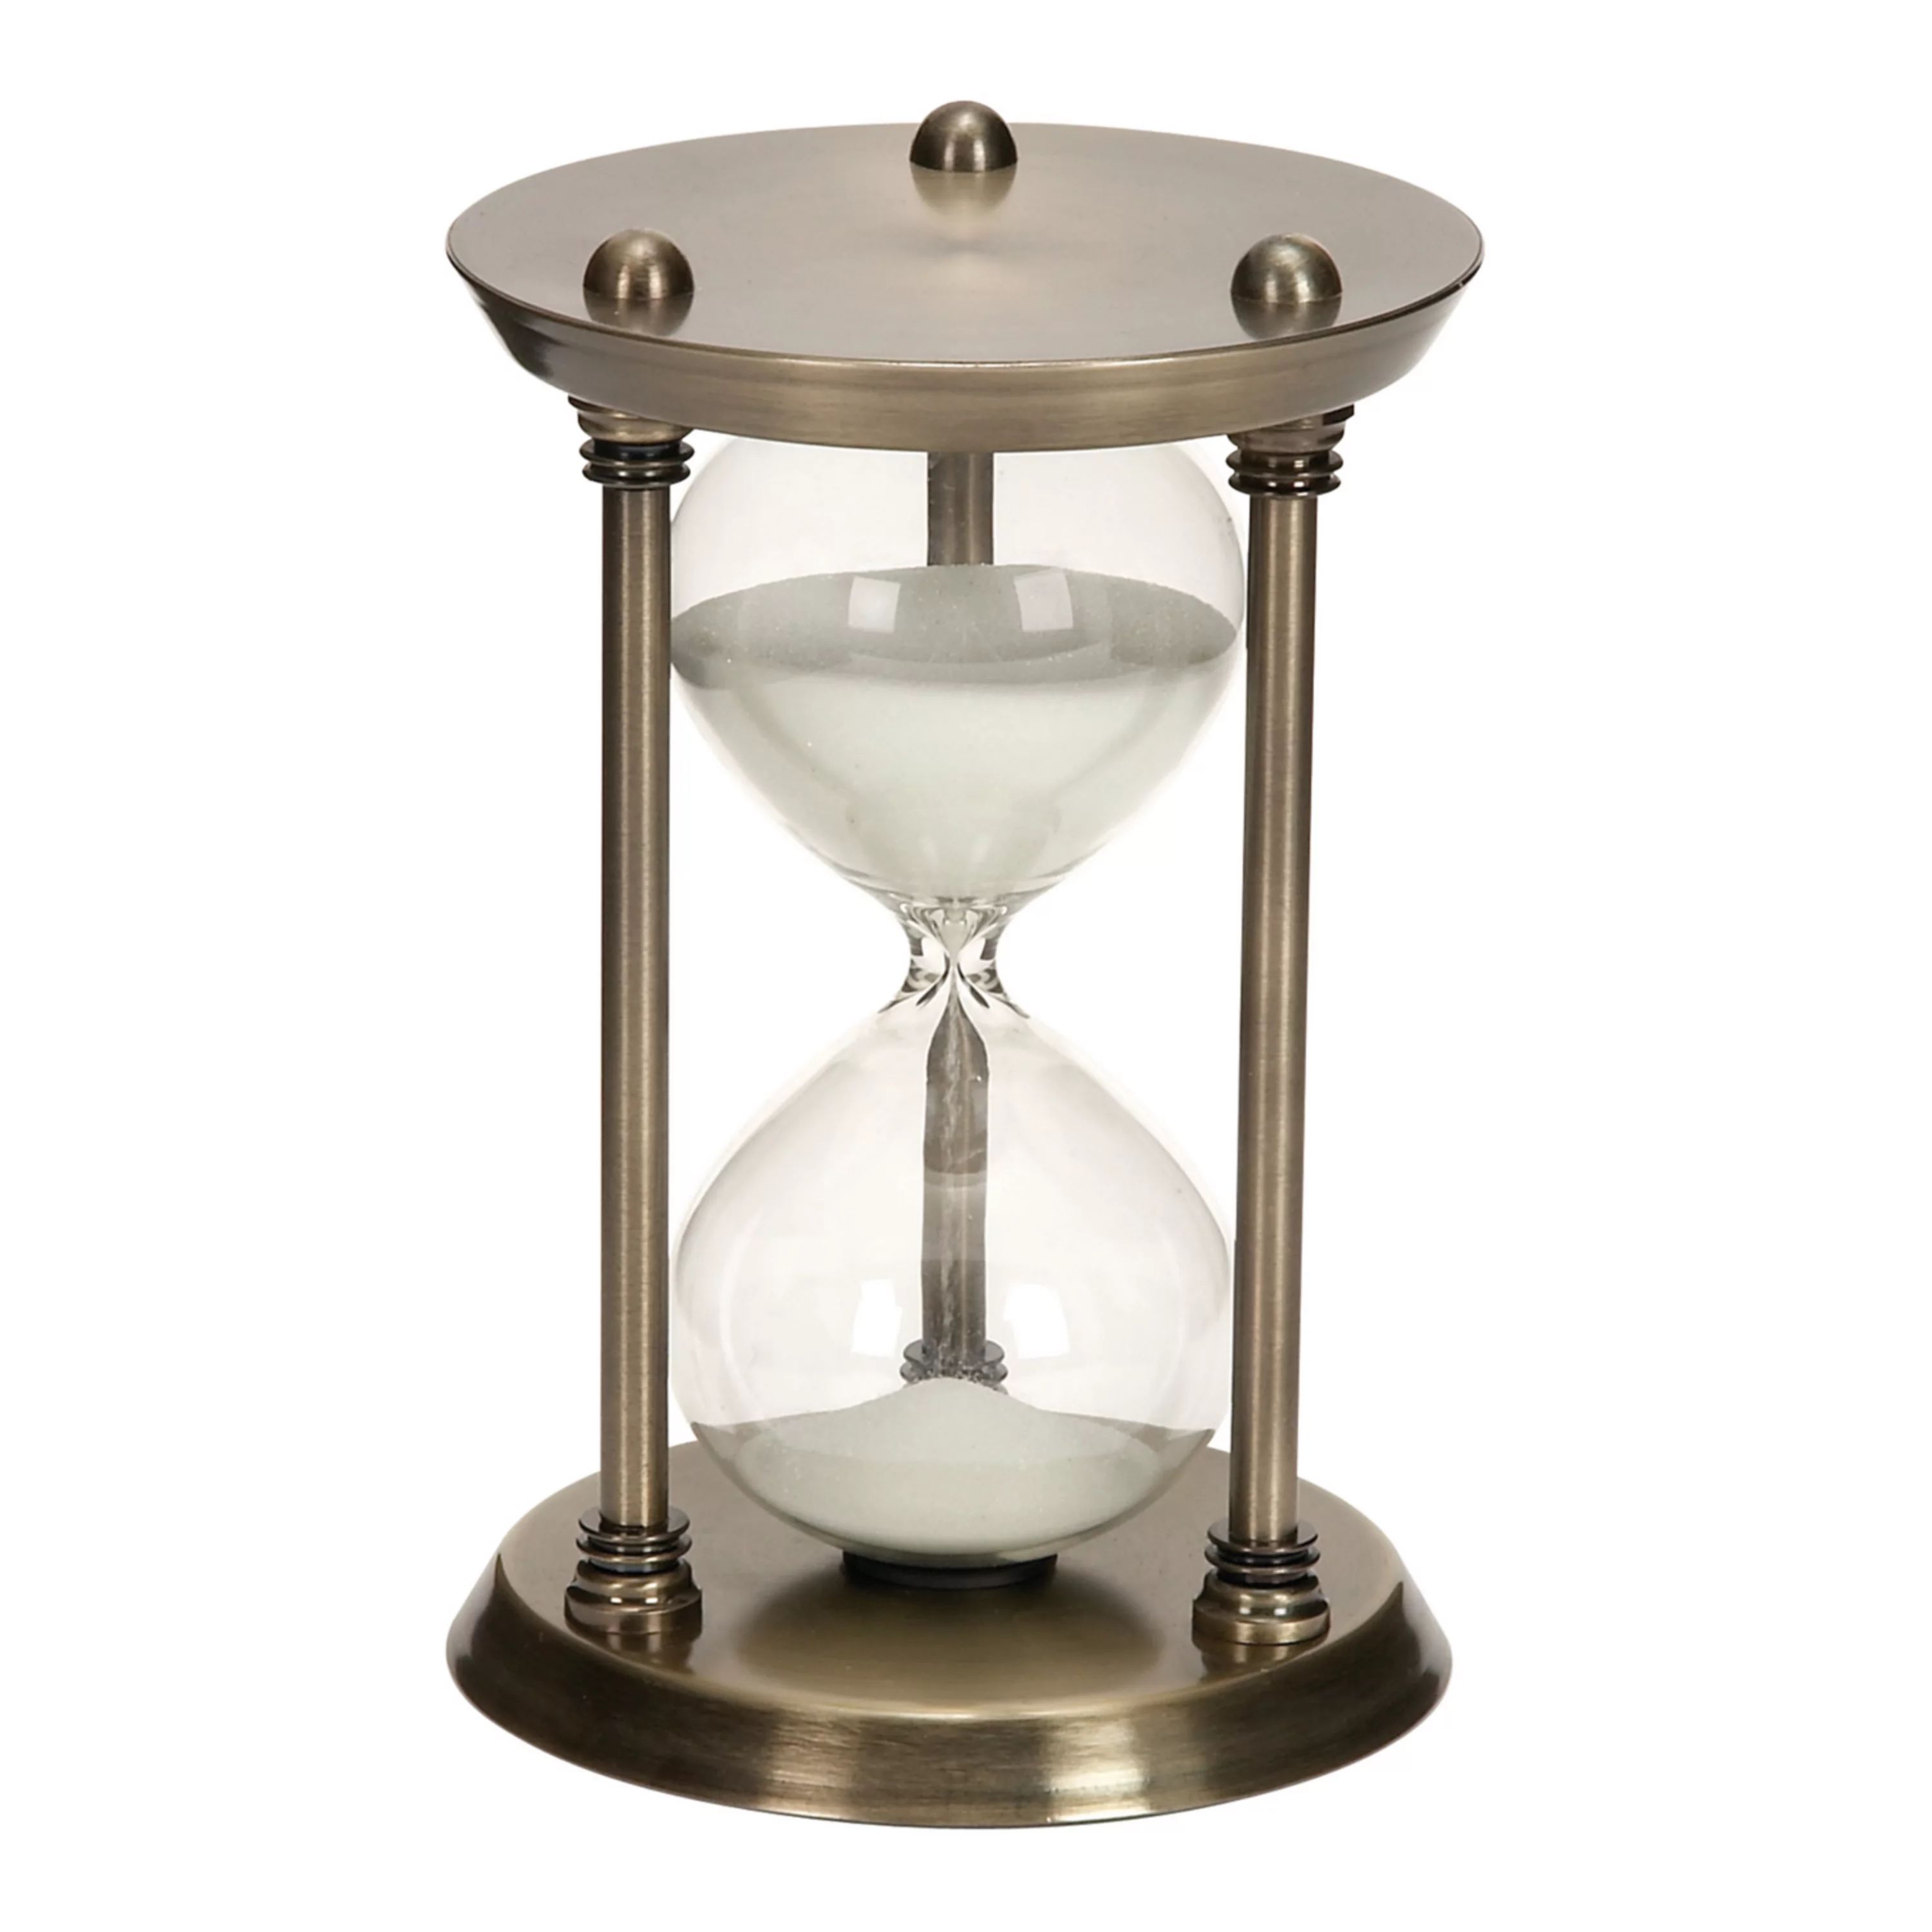 Stella & Eve Hourglass 30 Minute Timer Table Decor | Kohl's